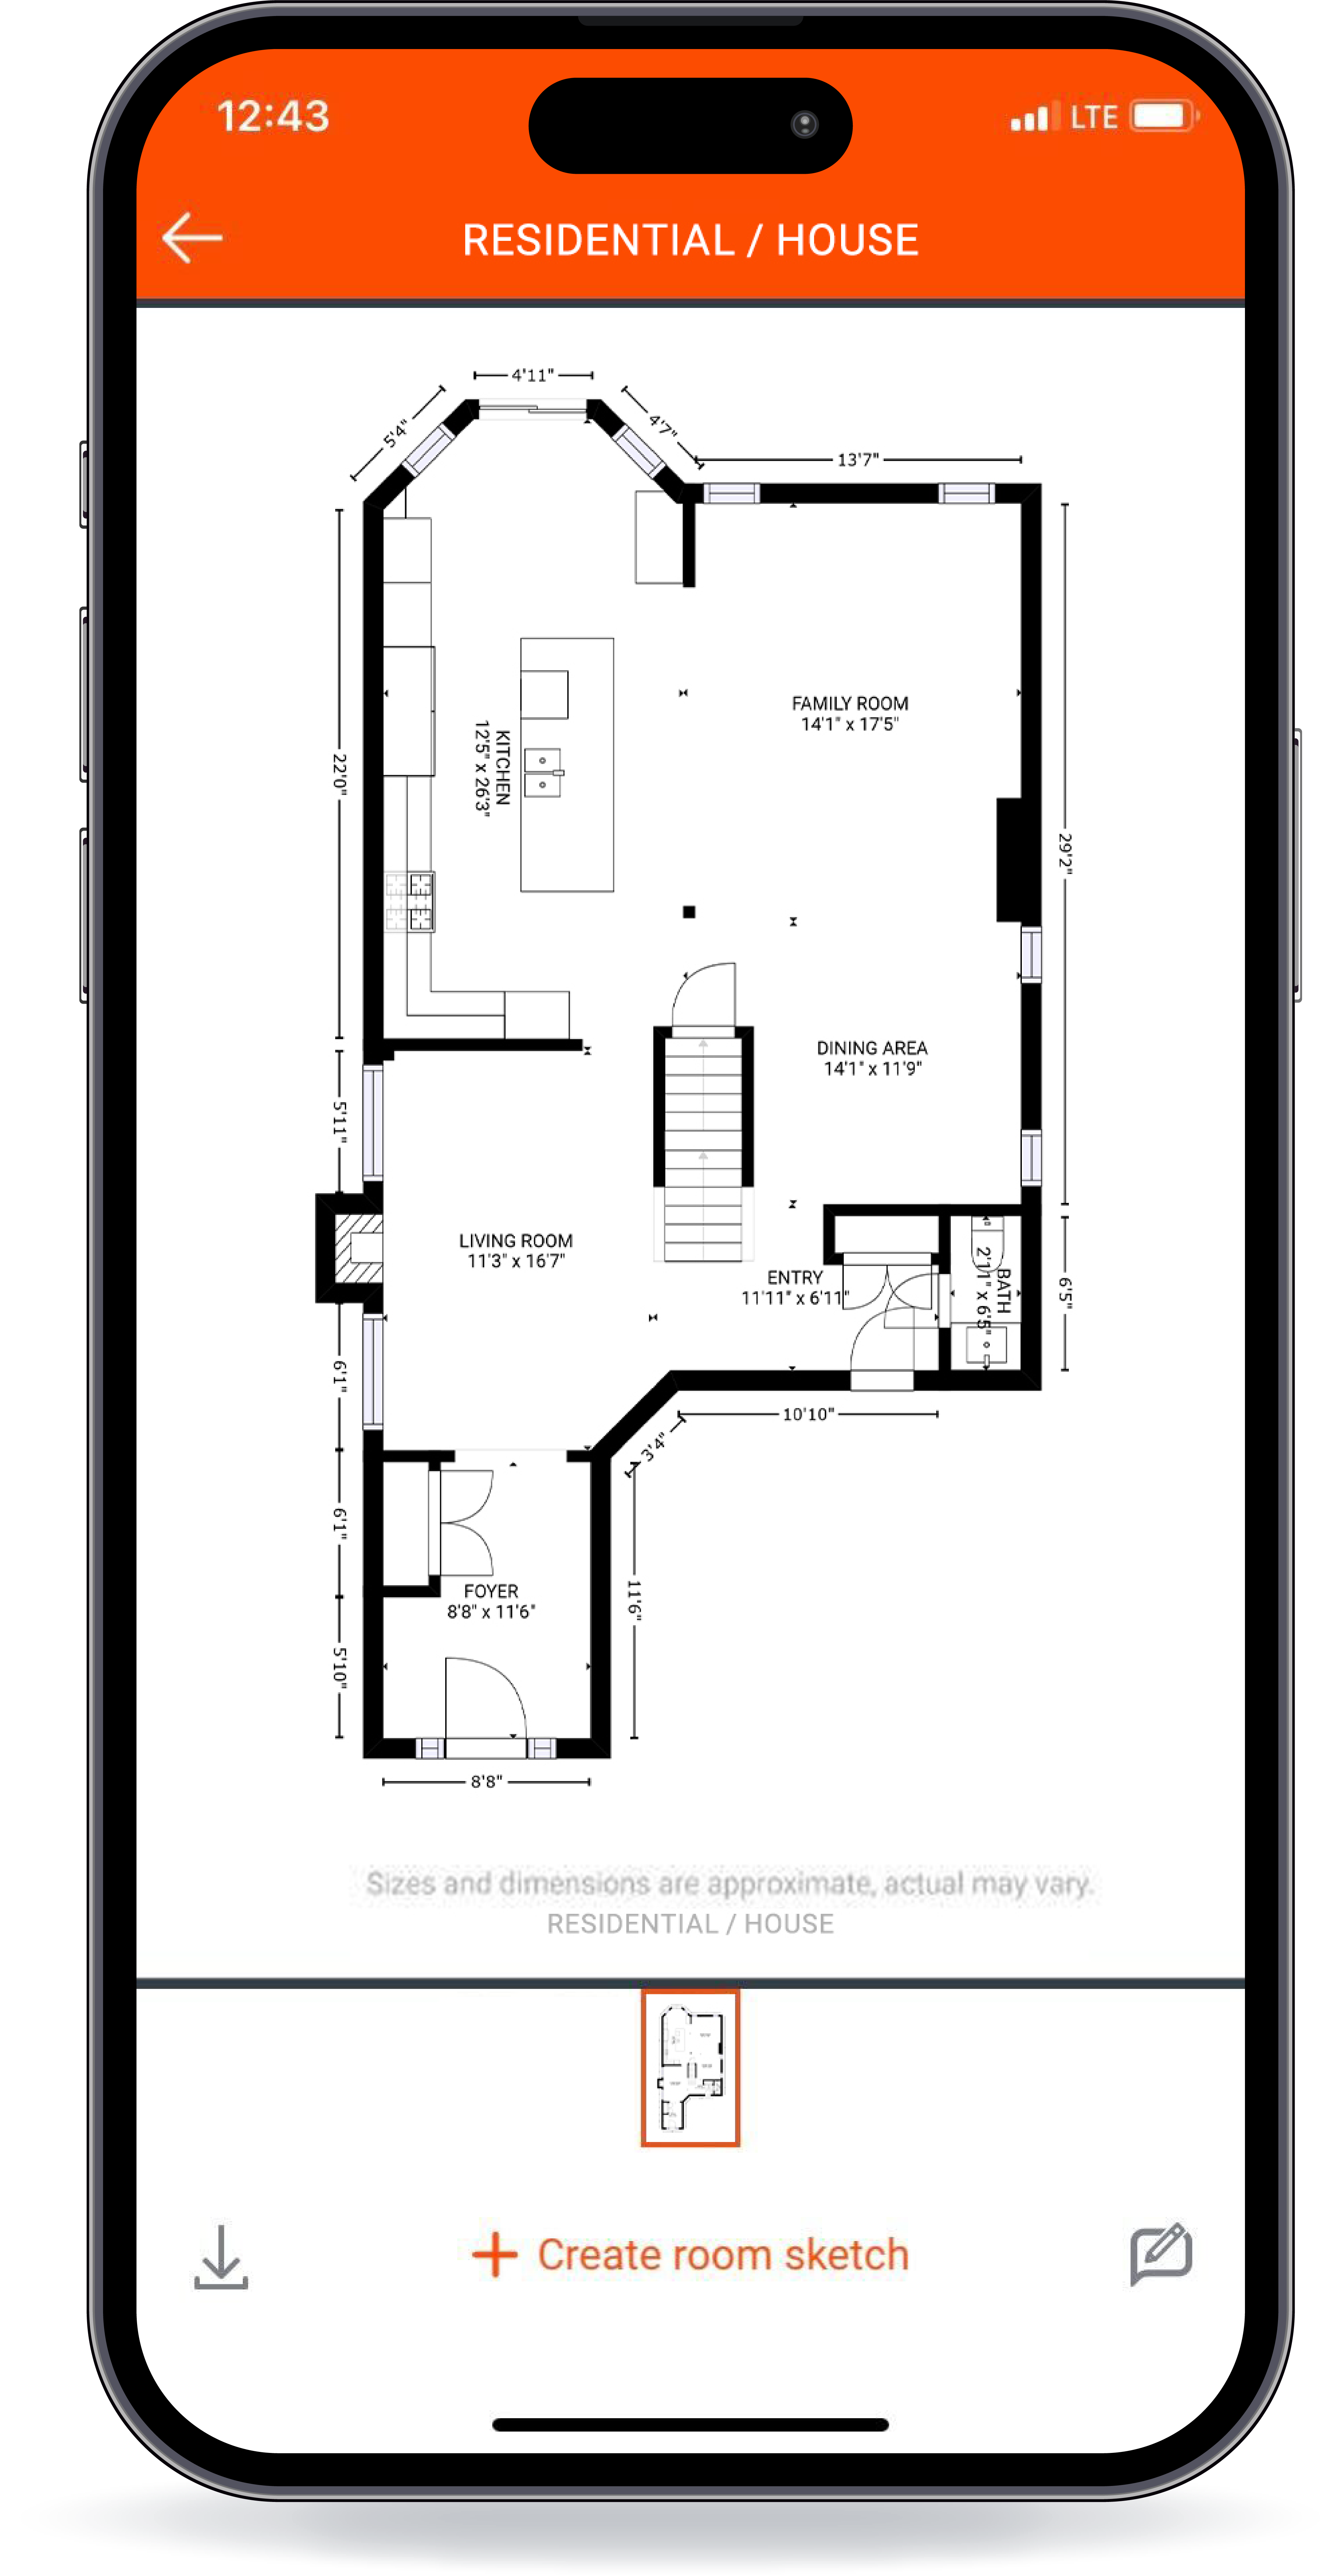 Capture and view 2D property floor plans directly from your smart phone.